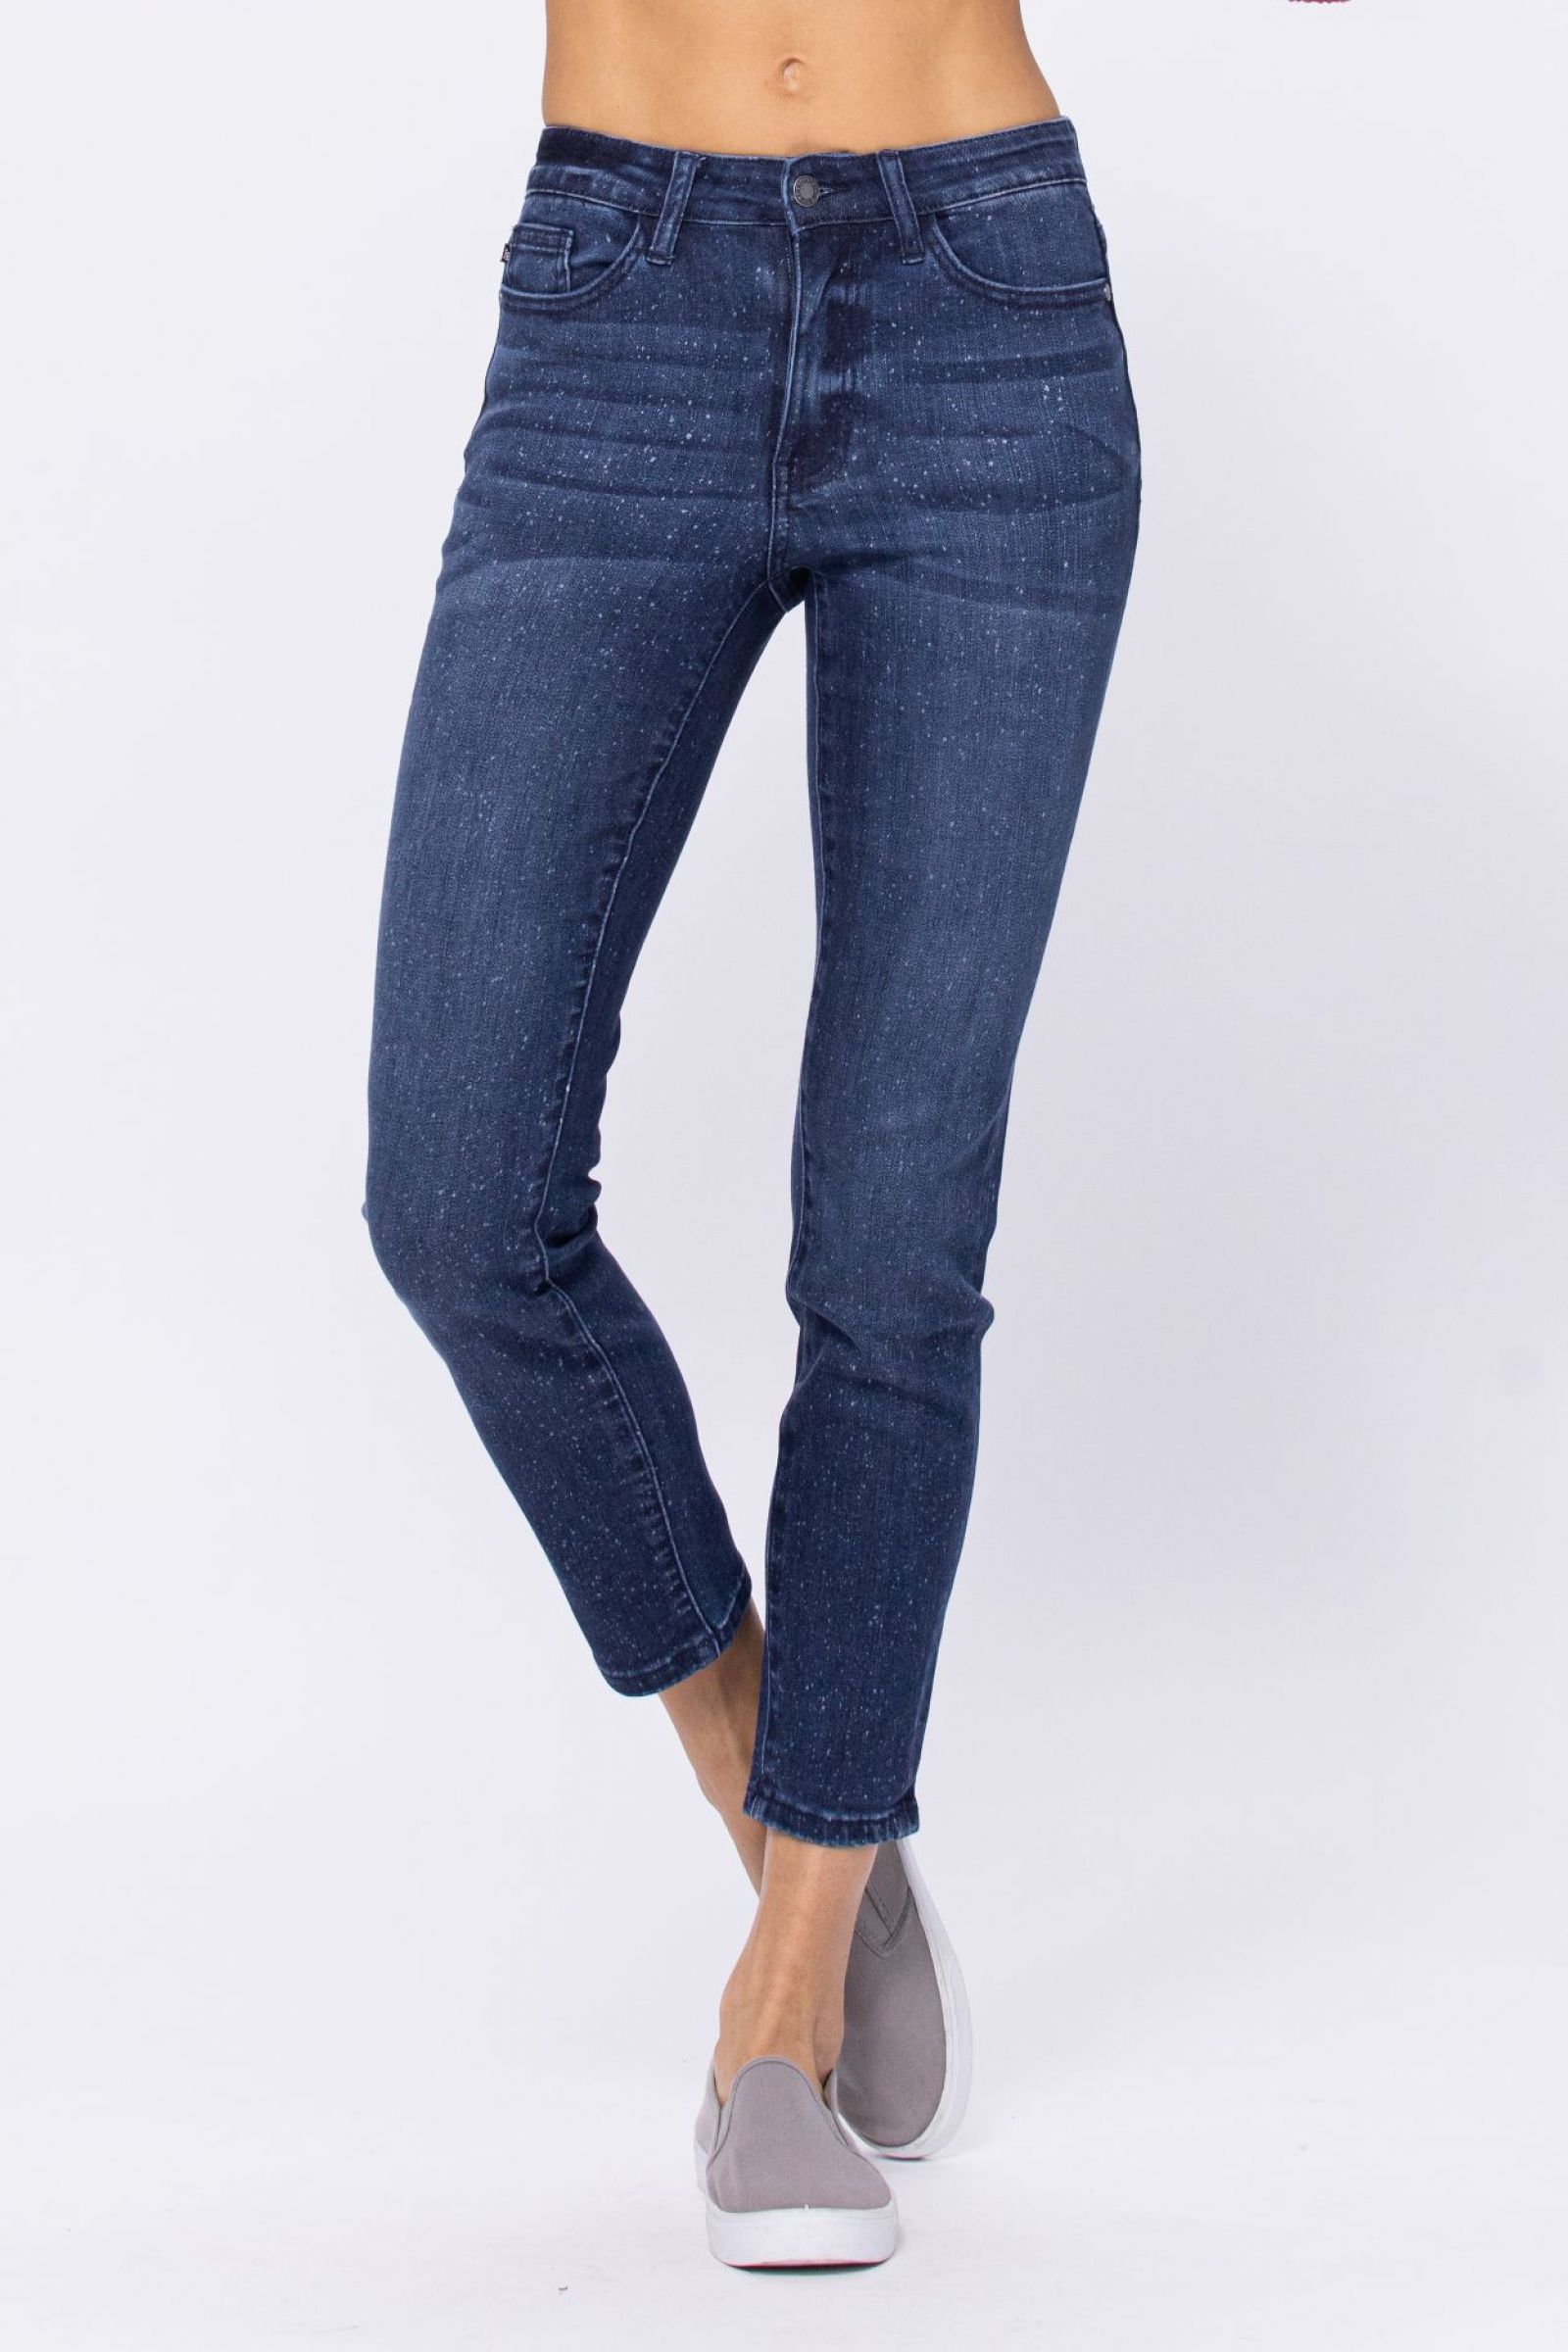 SALE Judy Blue Mid-Rise Acid Wash Relaxed Fit